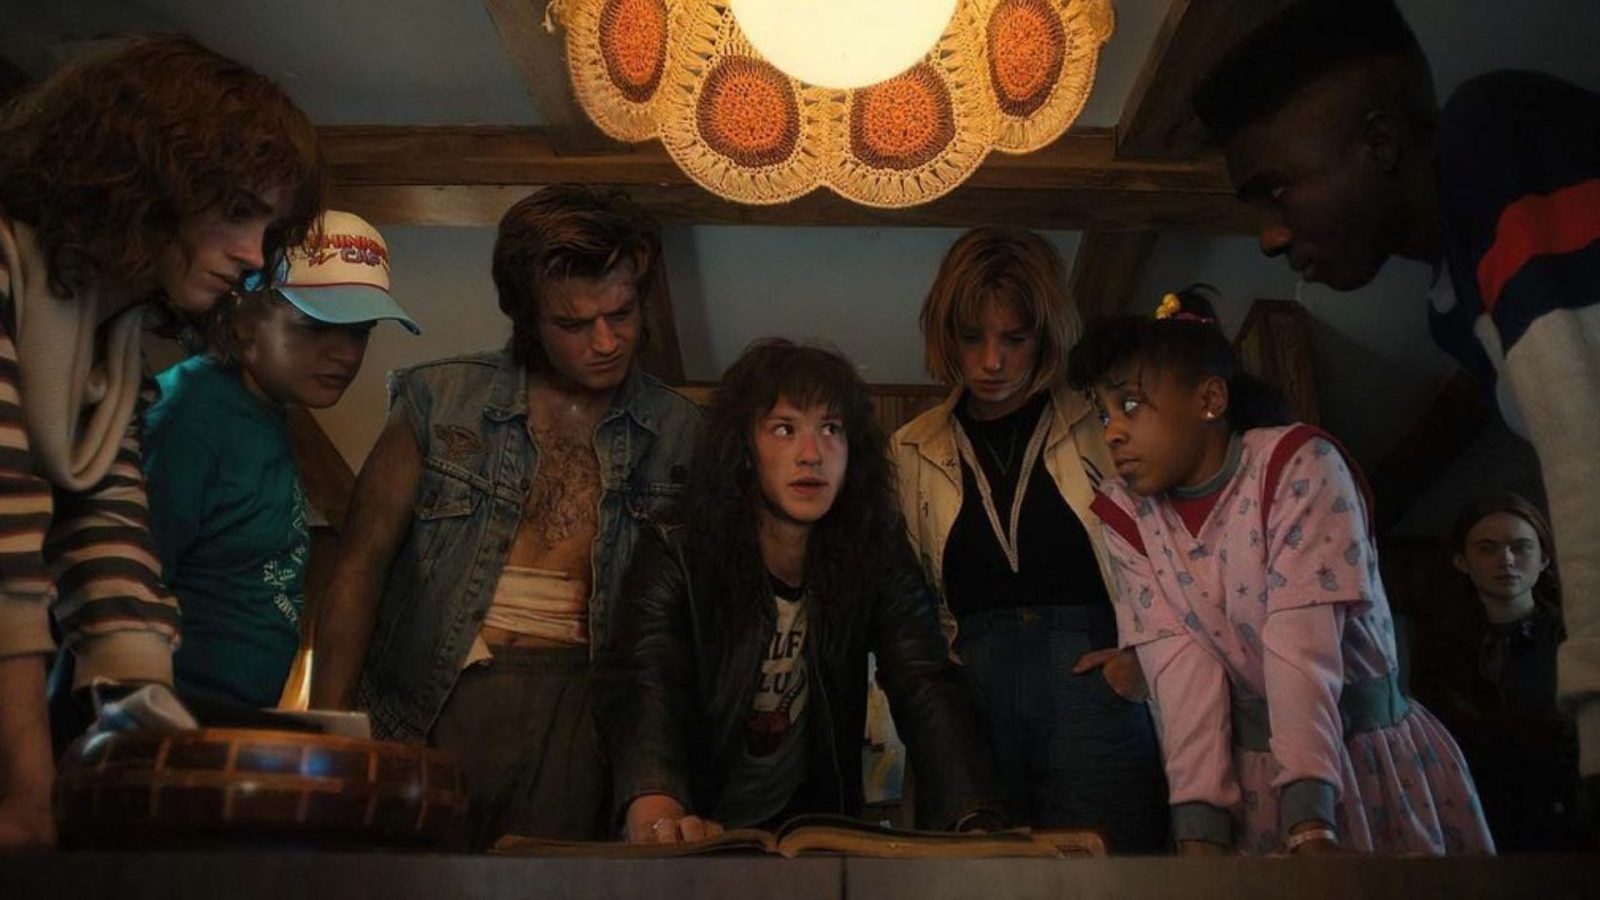 Stranger Things Tokyo The Franchises Anime Spinoff Reportedly in the  Works at Netflix